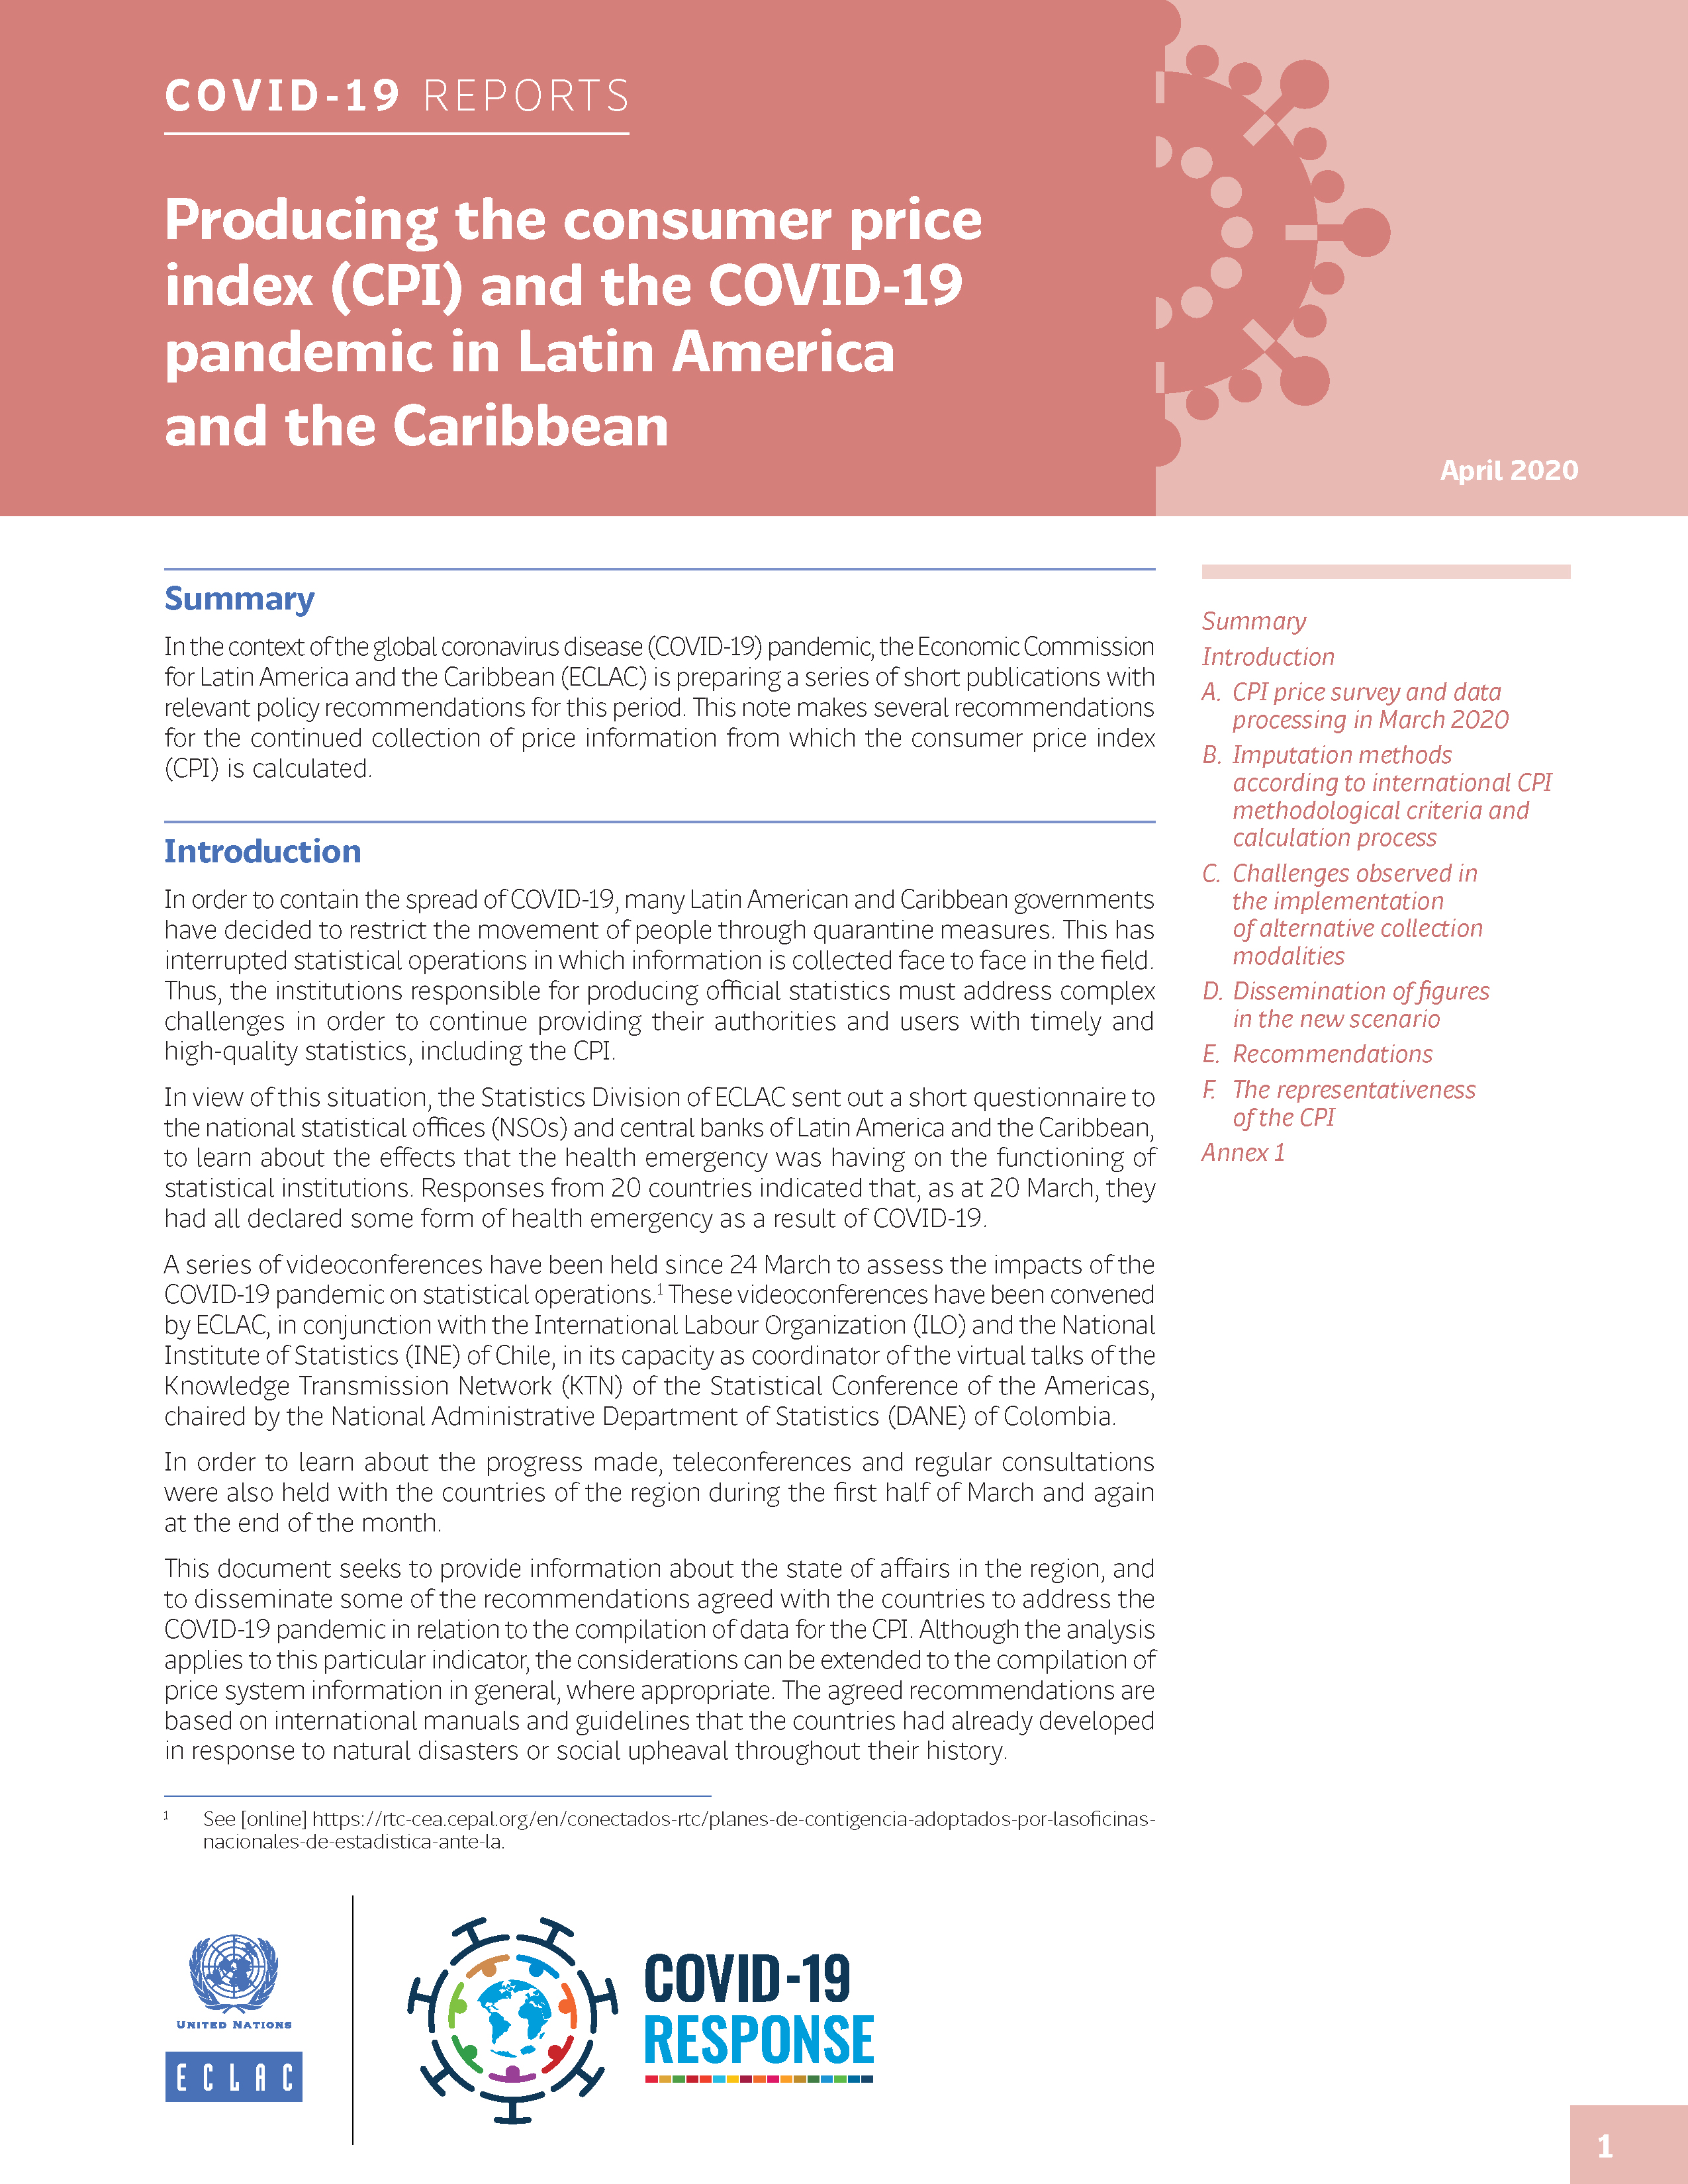 image of Producing the Consumer Price Index (CPI) and the COVID-19 Pandemic in Latin America and the Caribbean